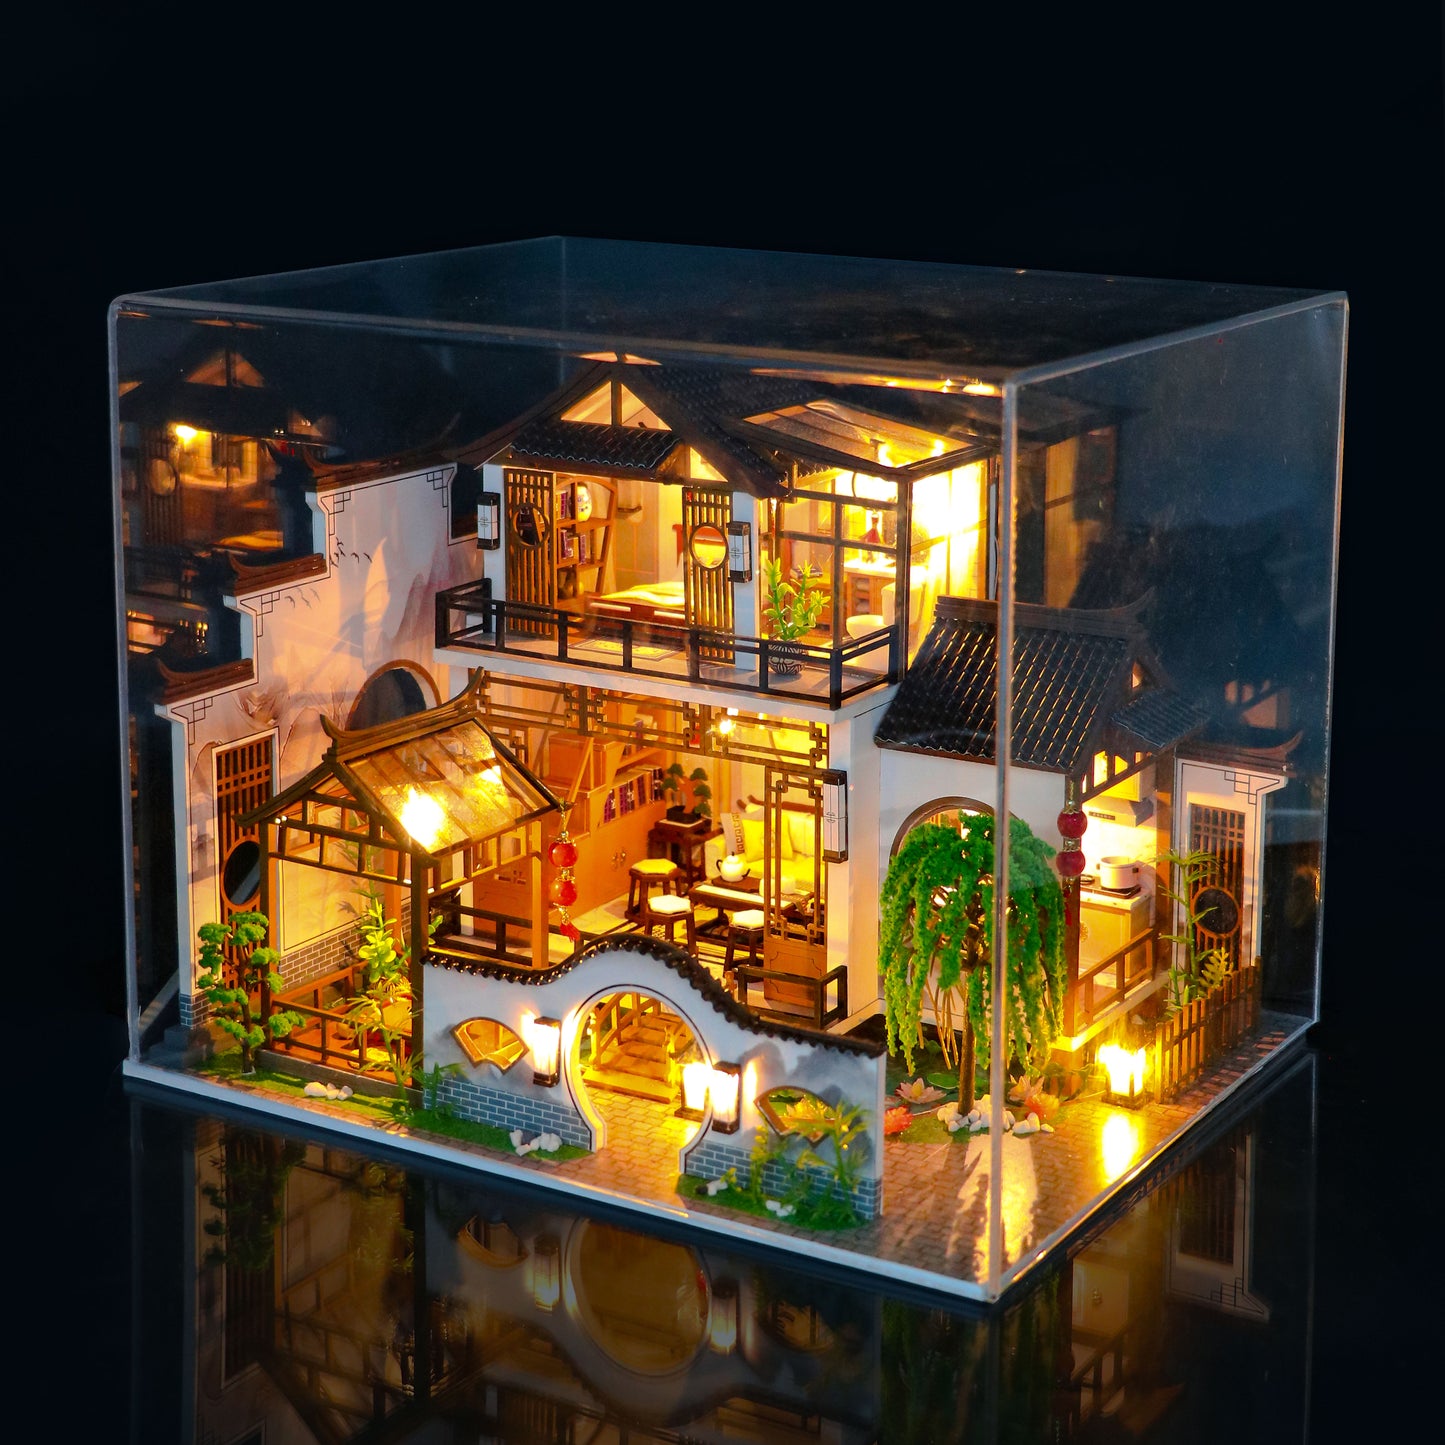 Hongda PC2314 ’Poetic Charm‘ w/Dust Proof Cover, Music Movement, LED Lights and Glues, Wooden Miniature Dollhouse Furniture Kits